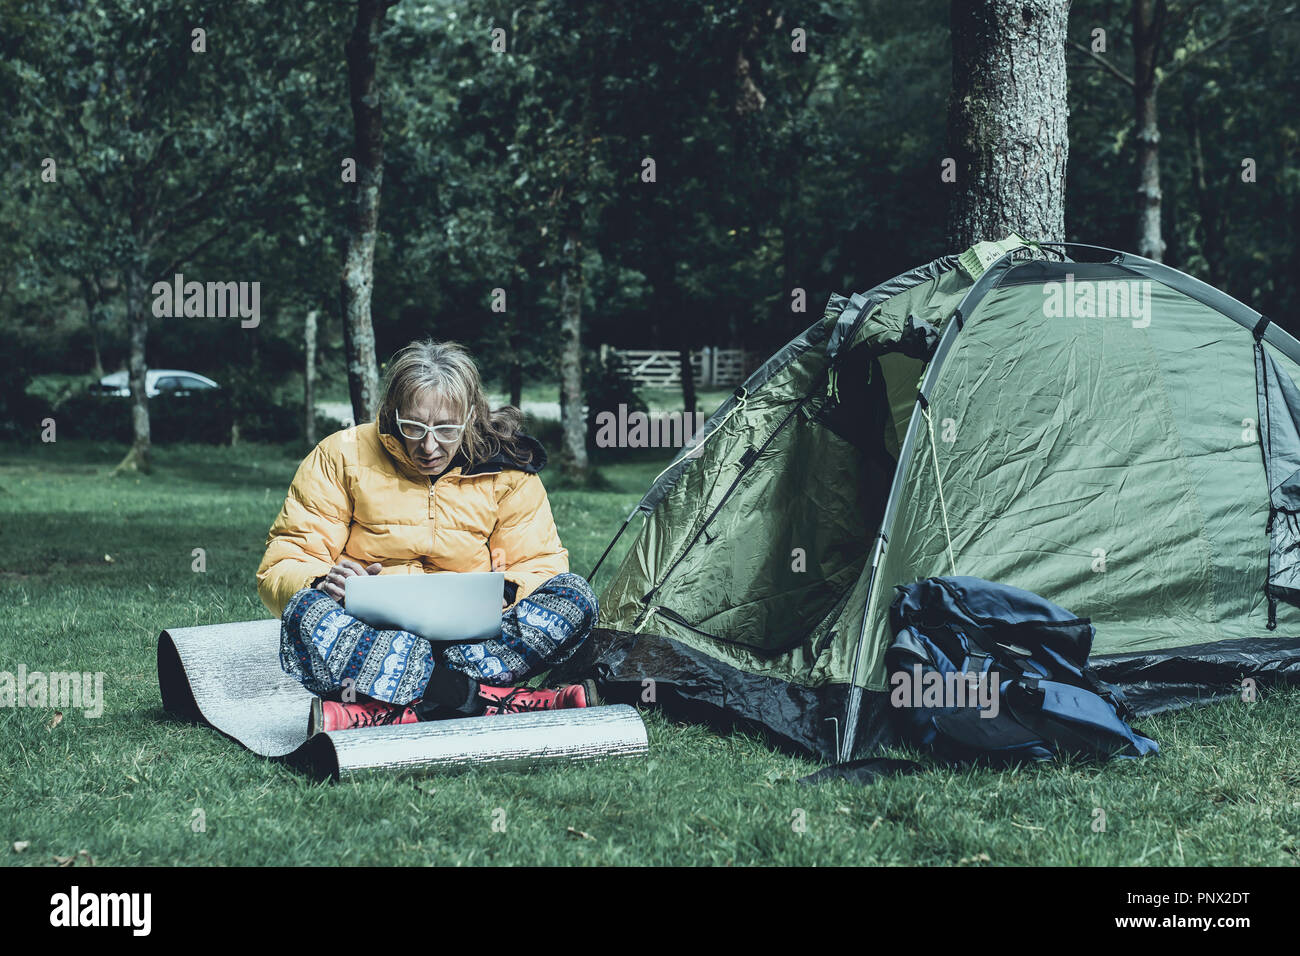 Casually dressed man working on his laptop, on campsite in rural uk.Mobile internet access allowing people to work in remote location. Stock Photo